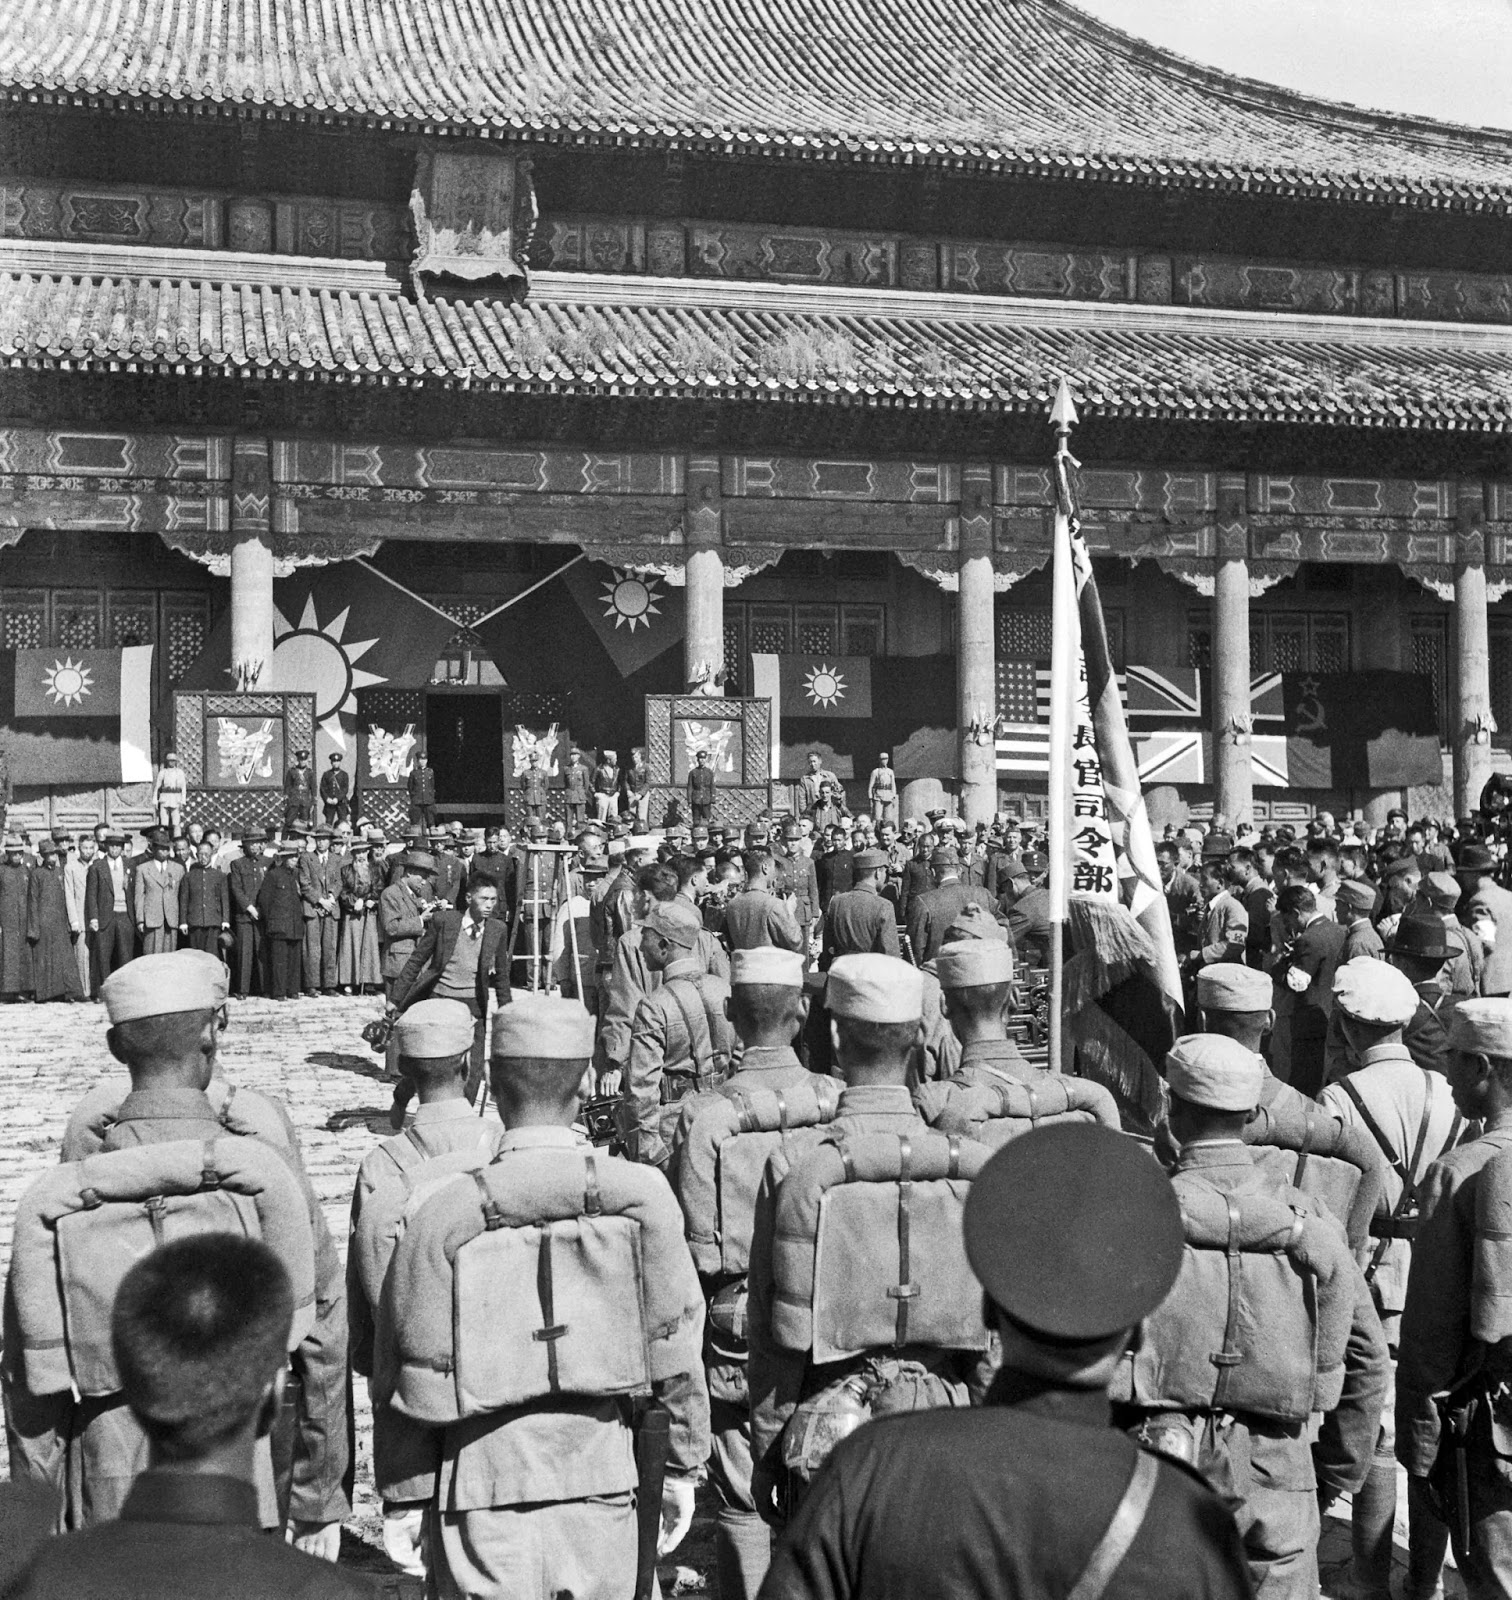 Chinese troops observing the Japanese surrender ceremony at the Forbidden City, Beiping, China, 10 Oct 1945, photo 1 of 2